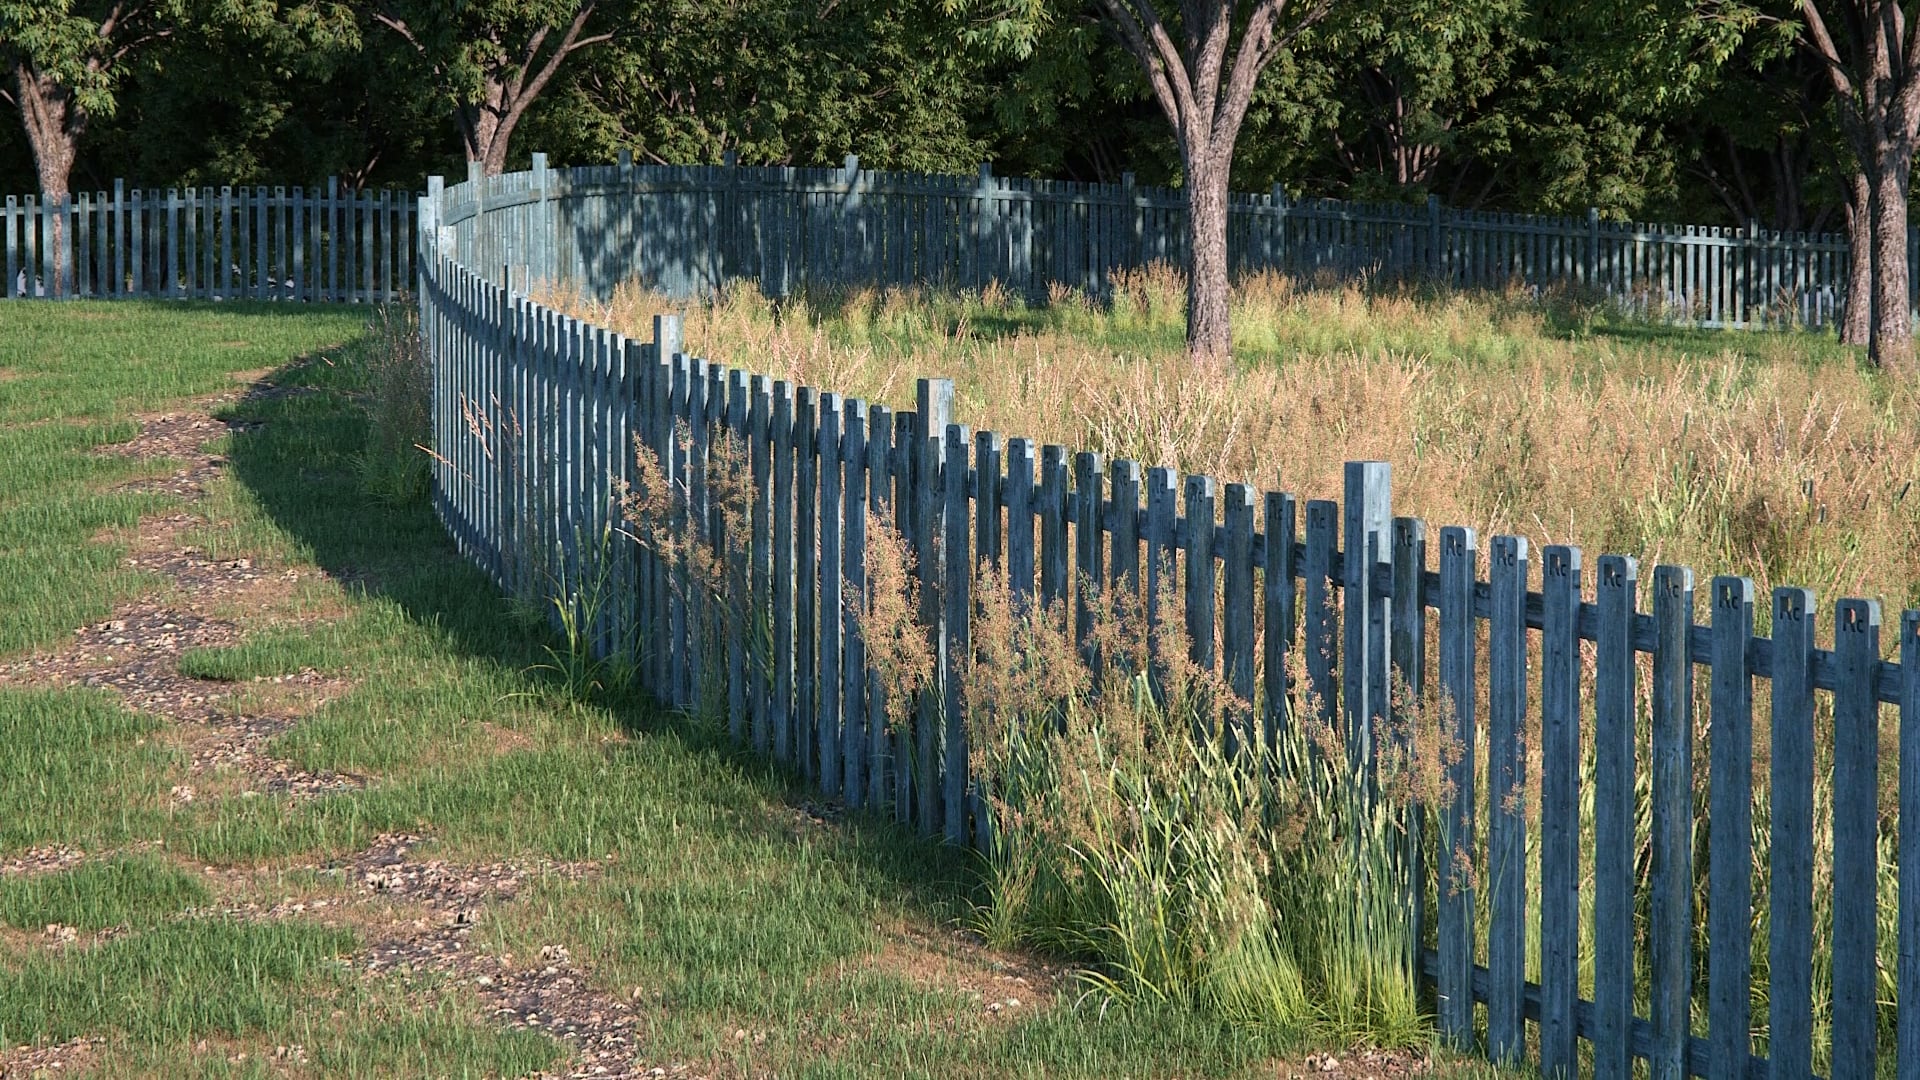 Making a Picket fence with RailClone in 3ds Max on Vimeo